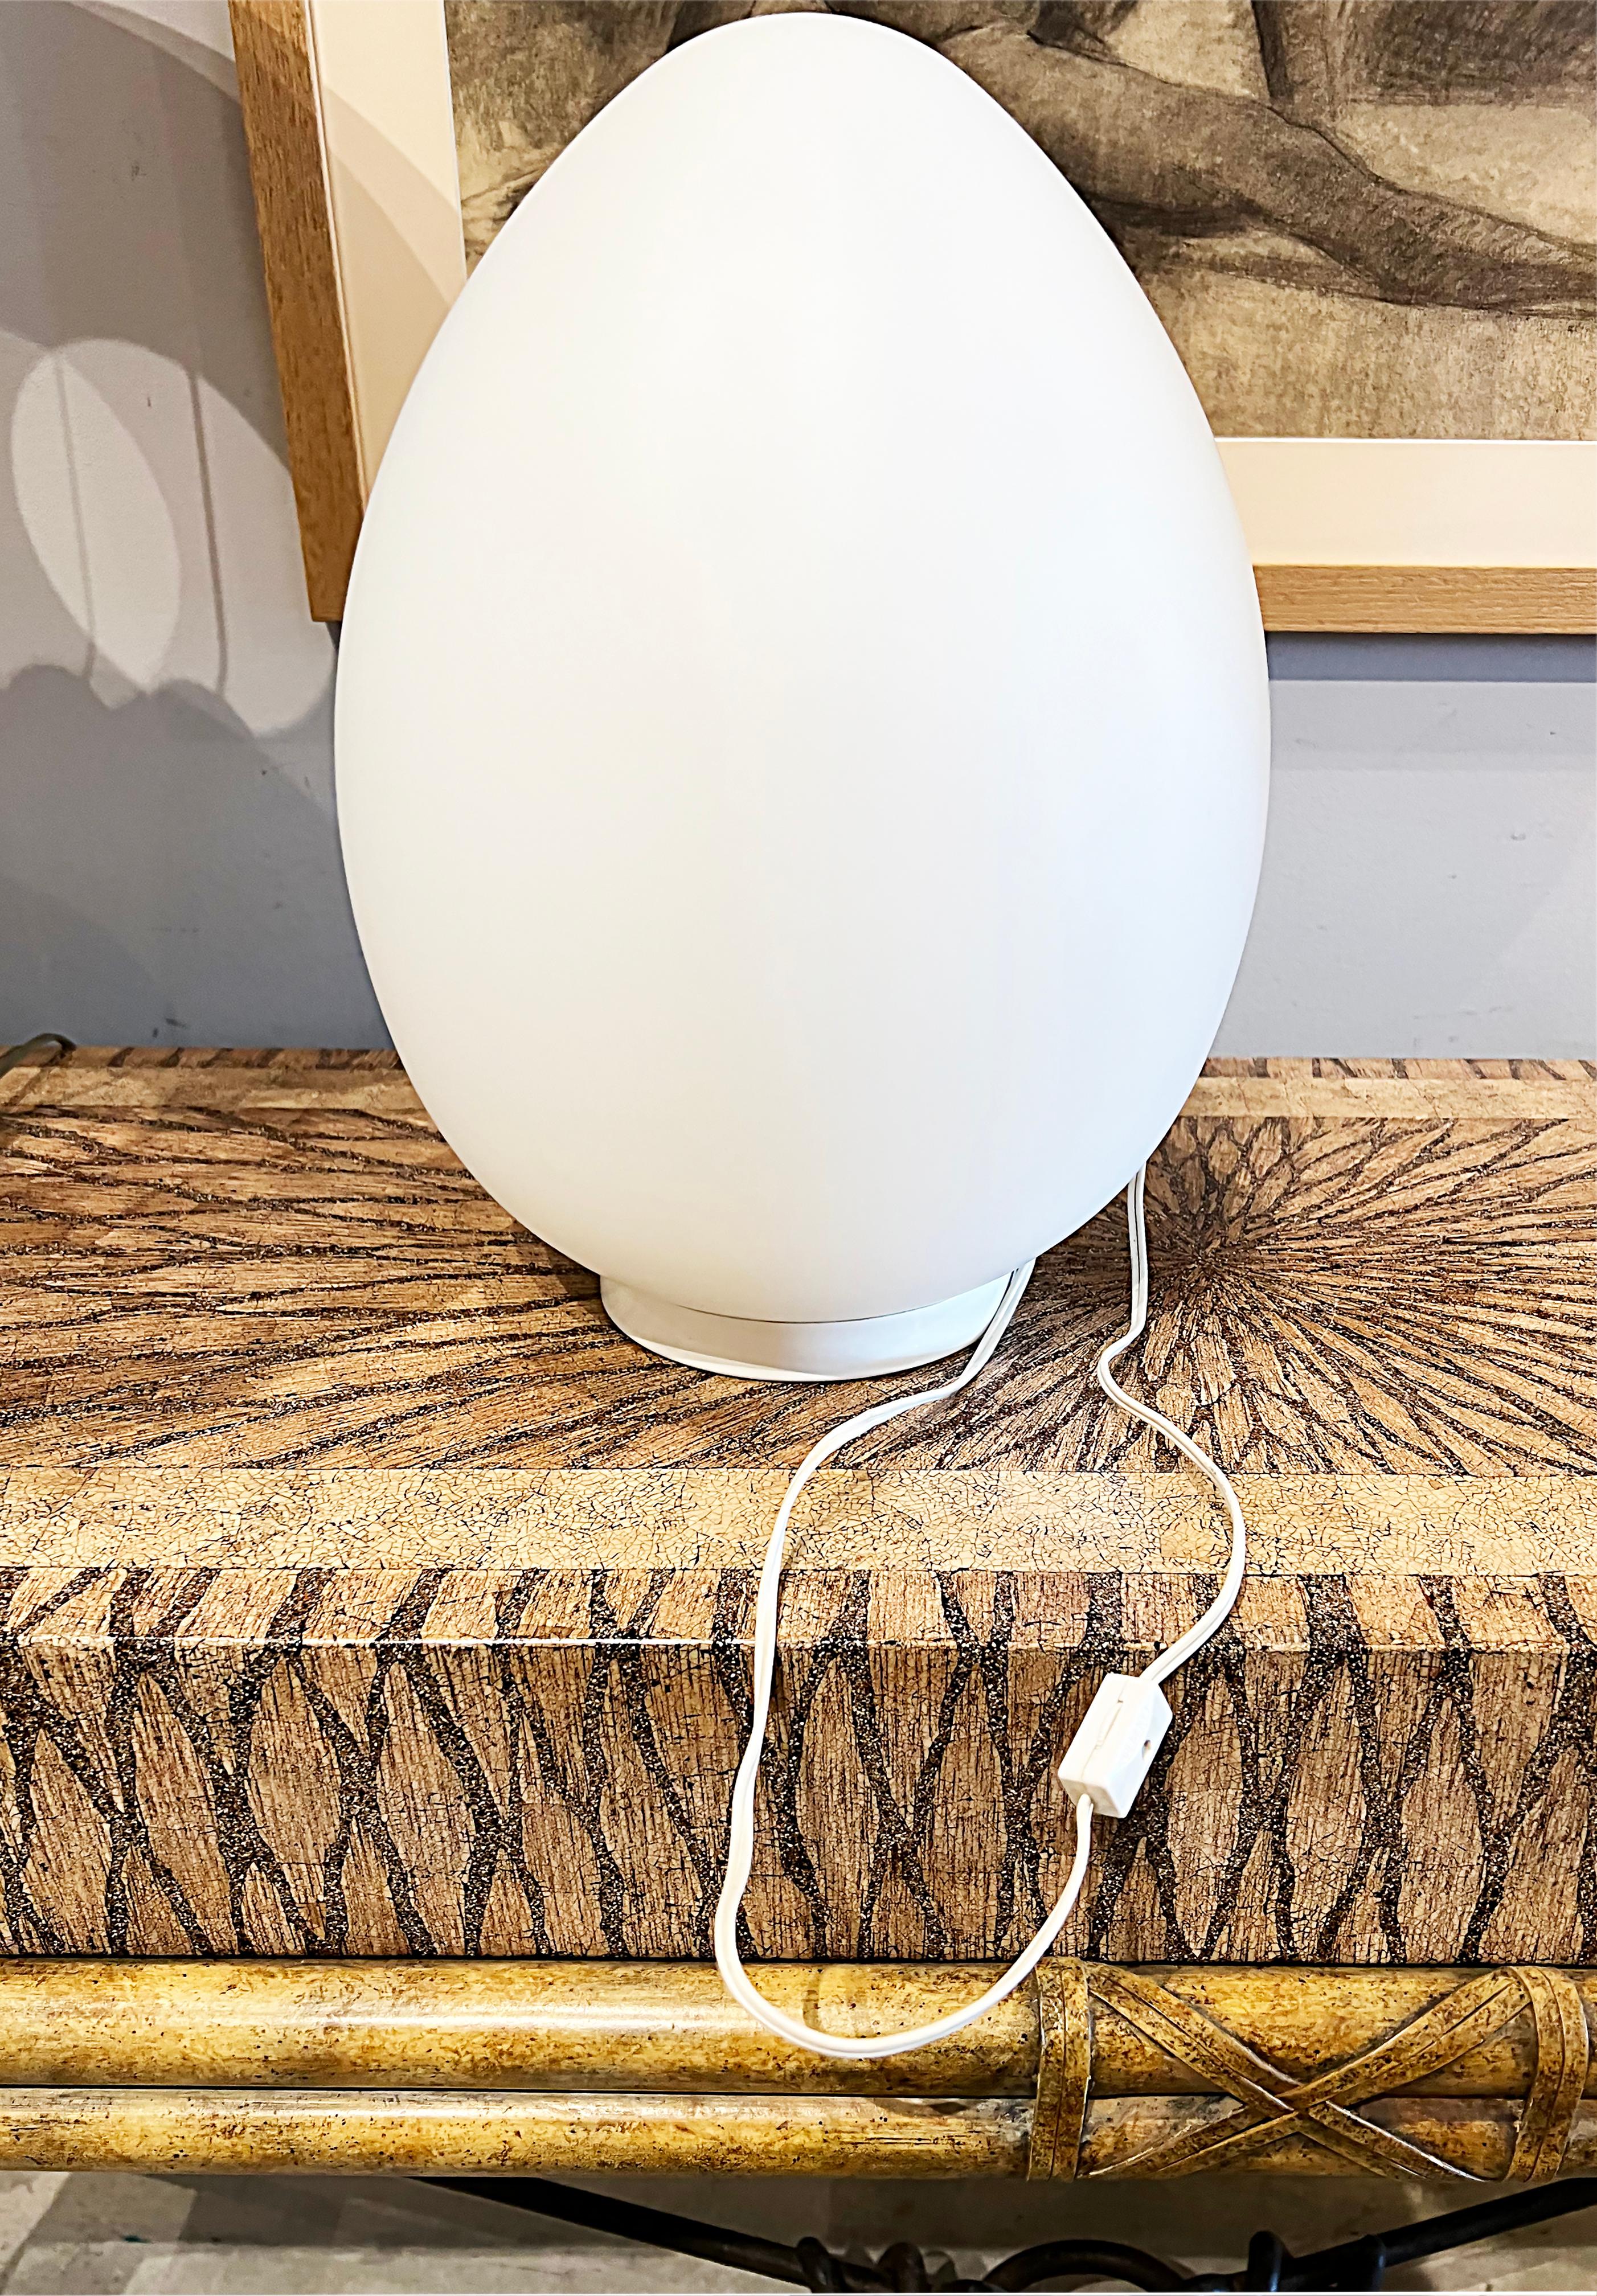 1960s Italian Frosted Glass Laurel Egg Lamp on Metal Base


Offered for sale is an Italian 1960s Laurel Egg Lamp with a frosted egg-shaped glass accent table lamp. The shade is supported by a white metal base that gives off a great warm glow. The